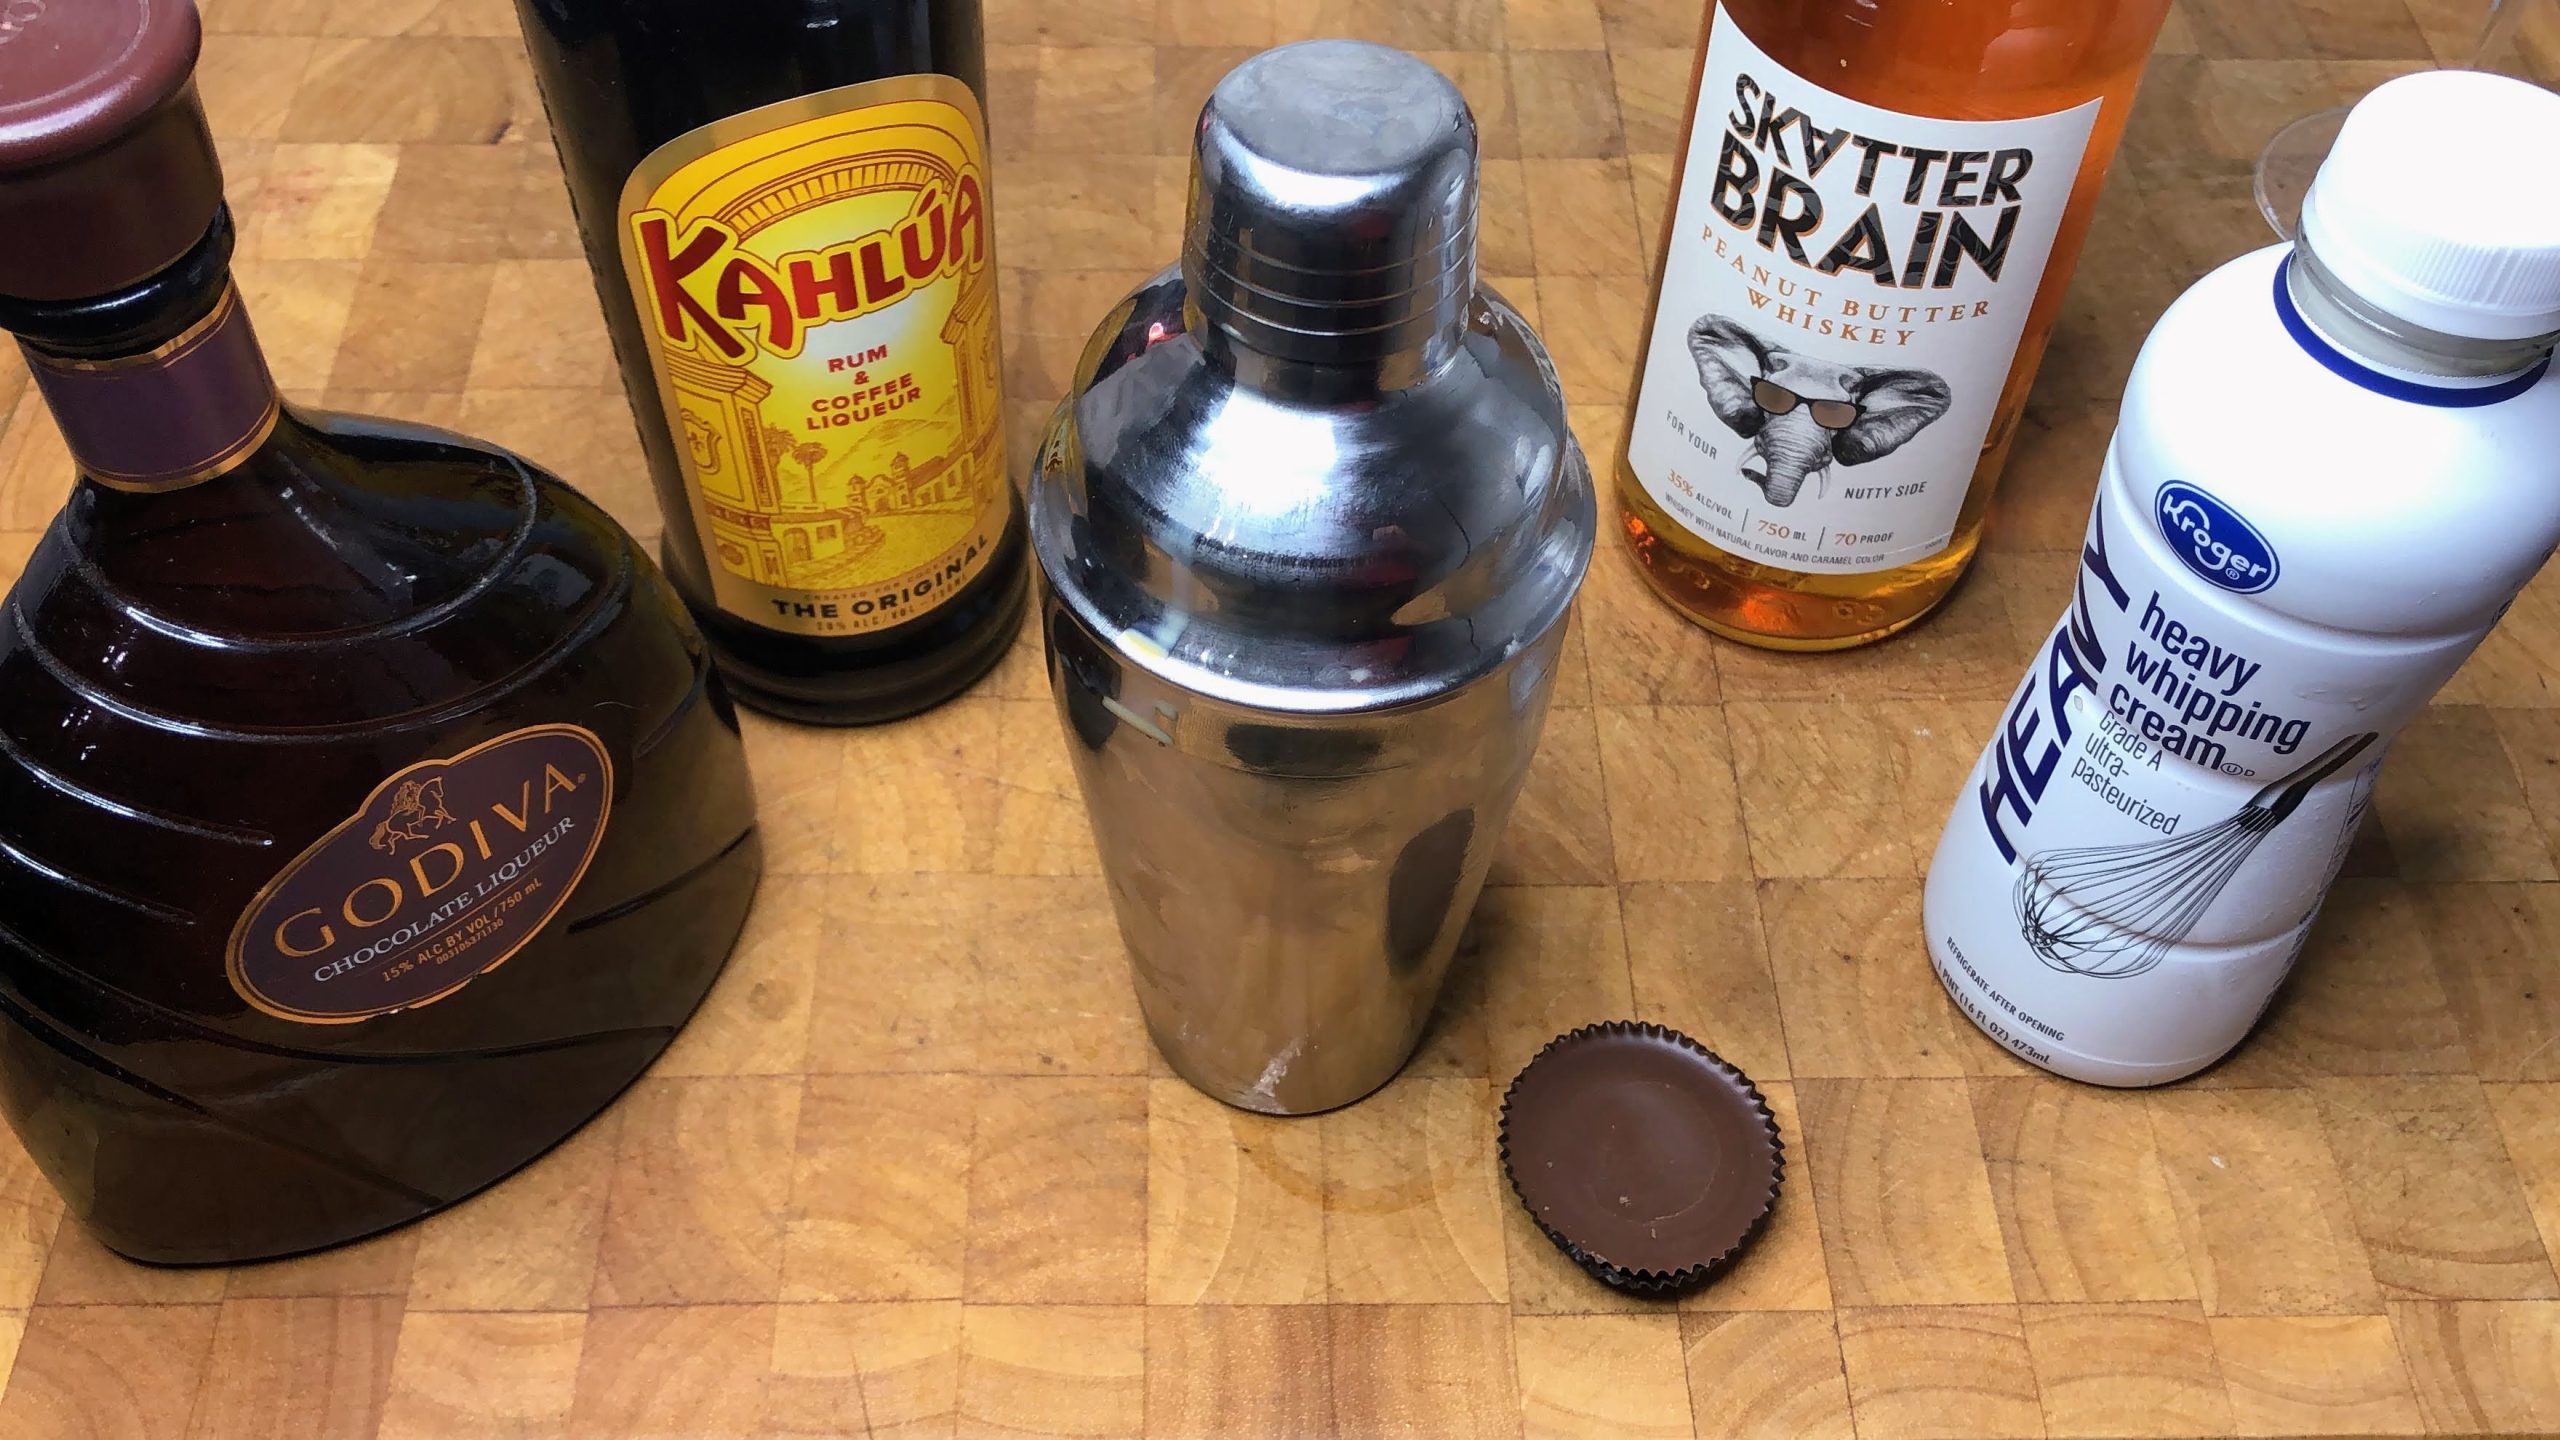 cocktail shaker next to peanut butter cup and bottles of godiva, kahlua, peanut butter whiskey and heavy cream